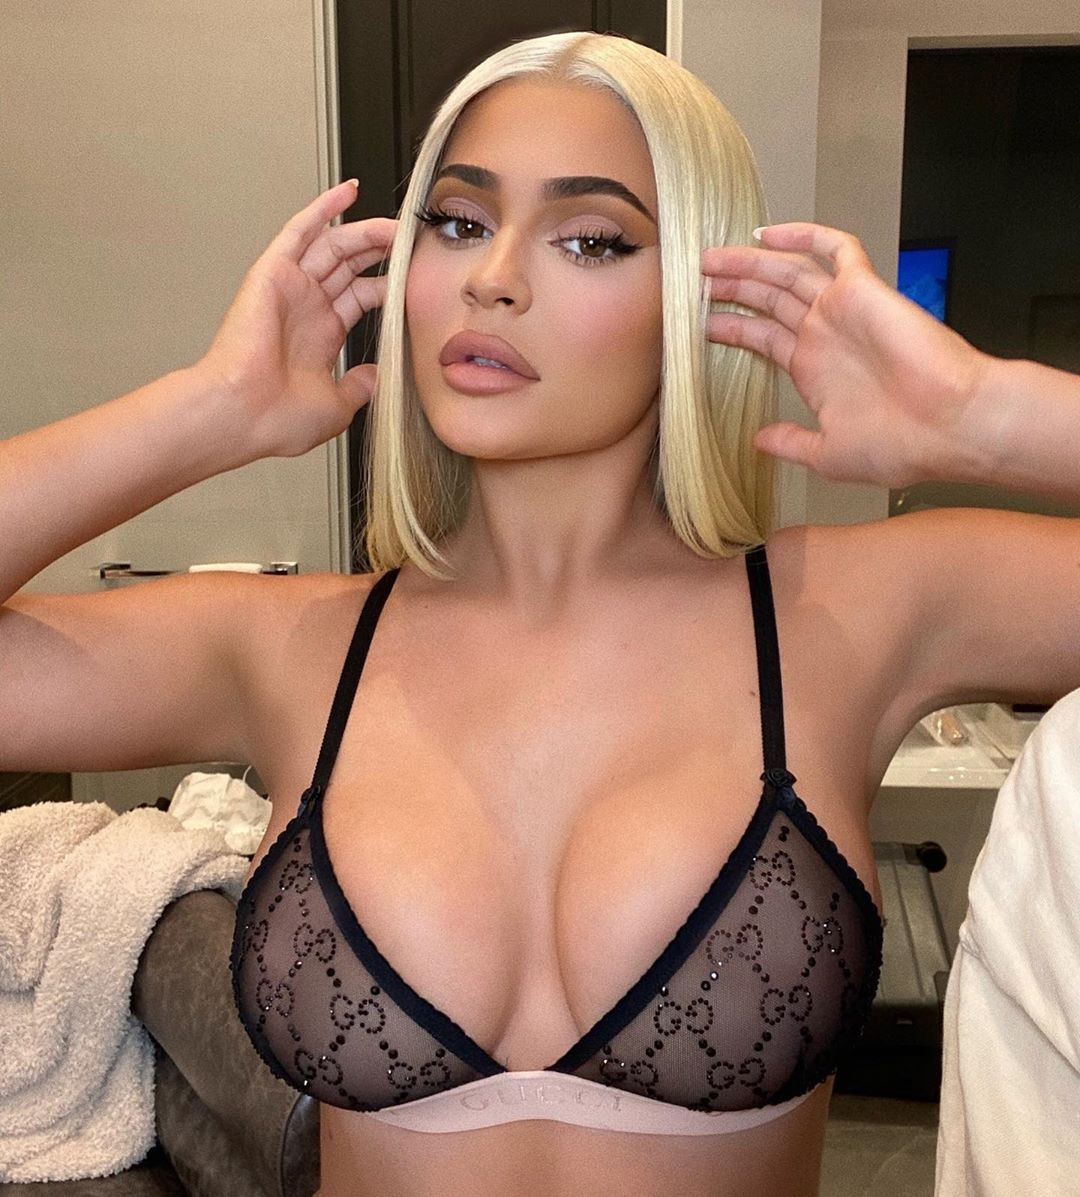 clare melbourne share kylie jenner fappening photos